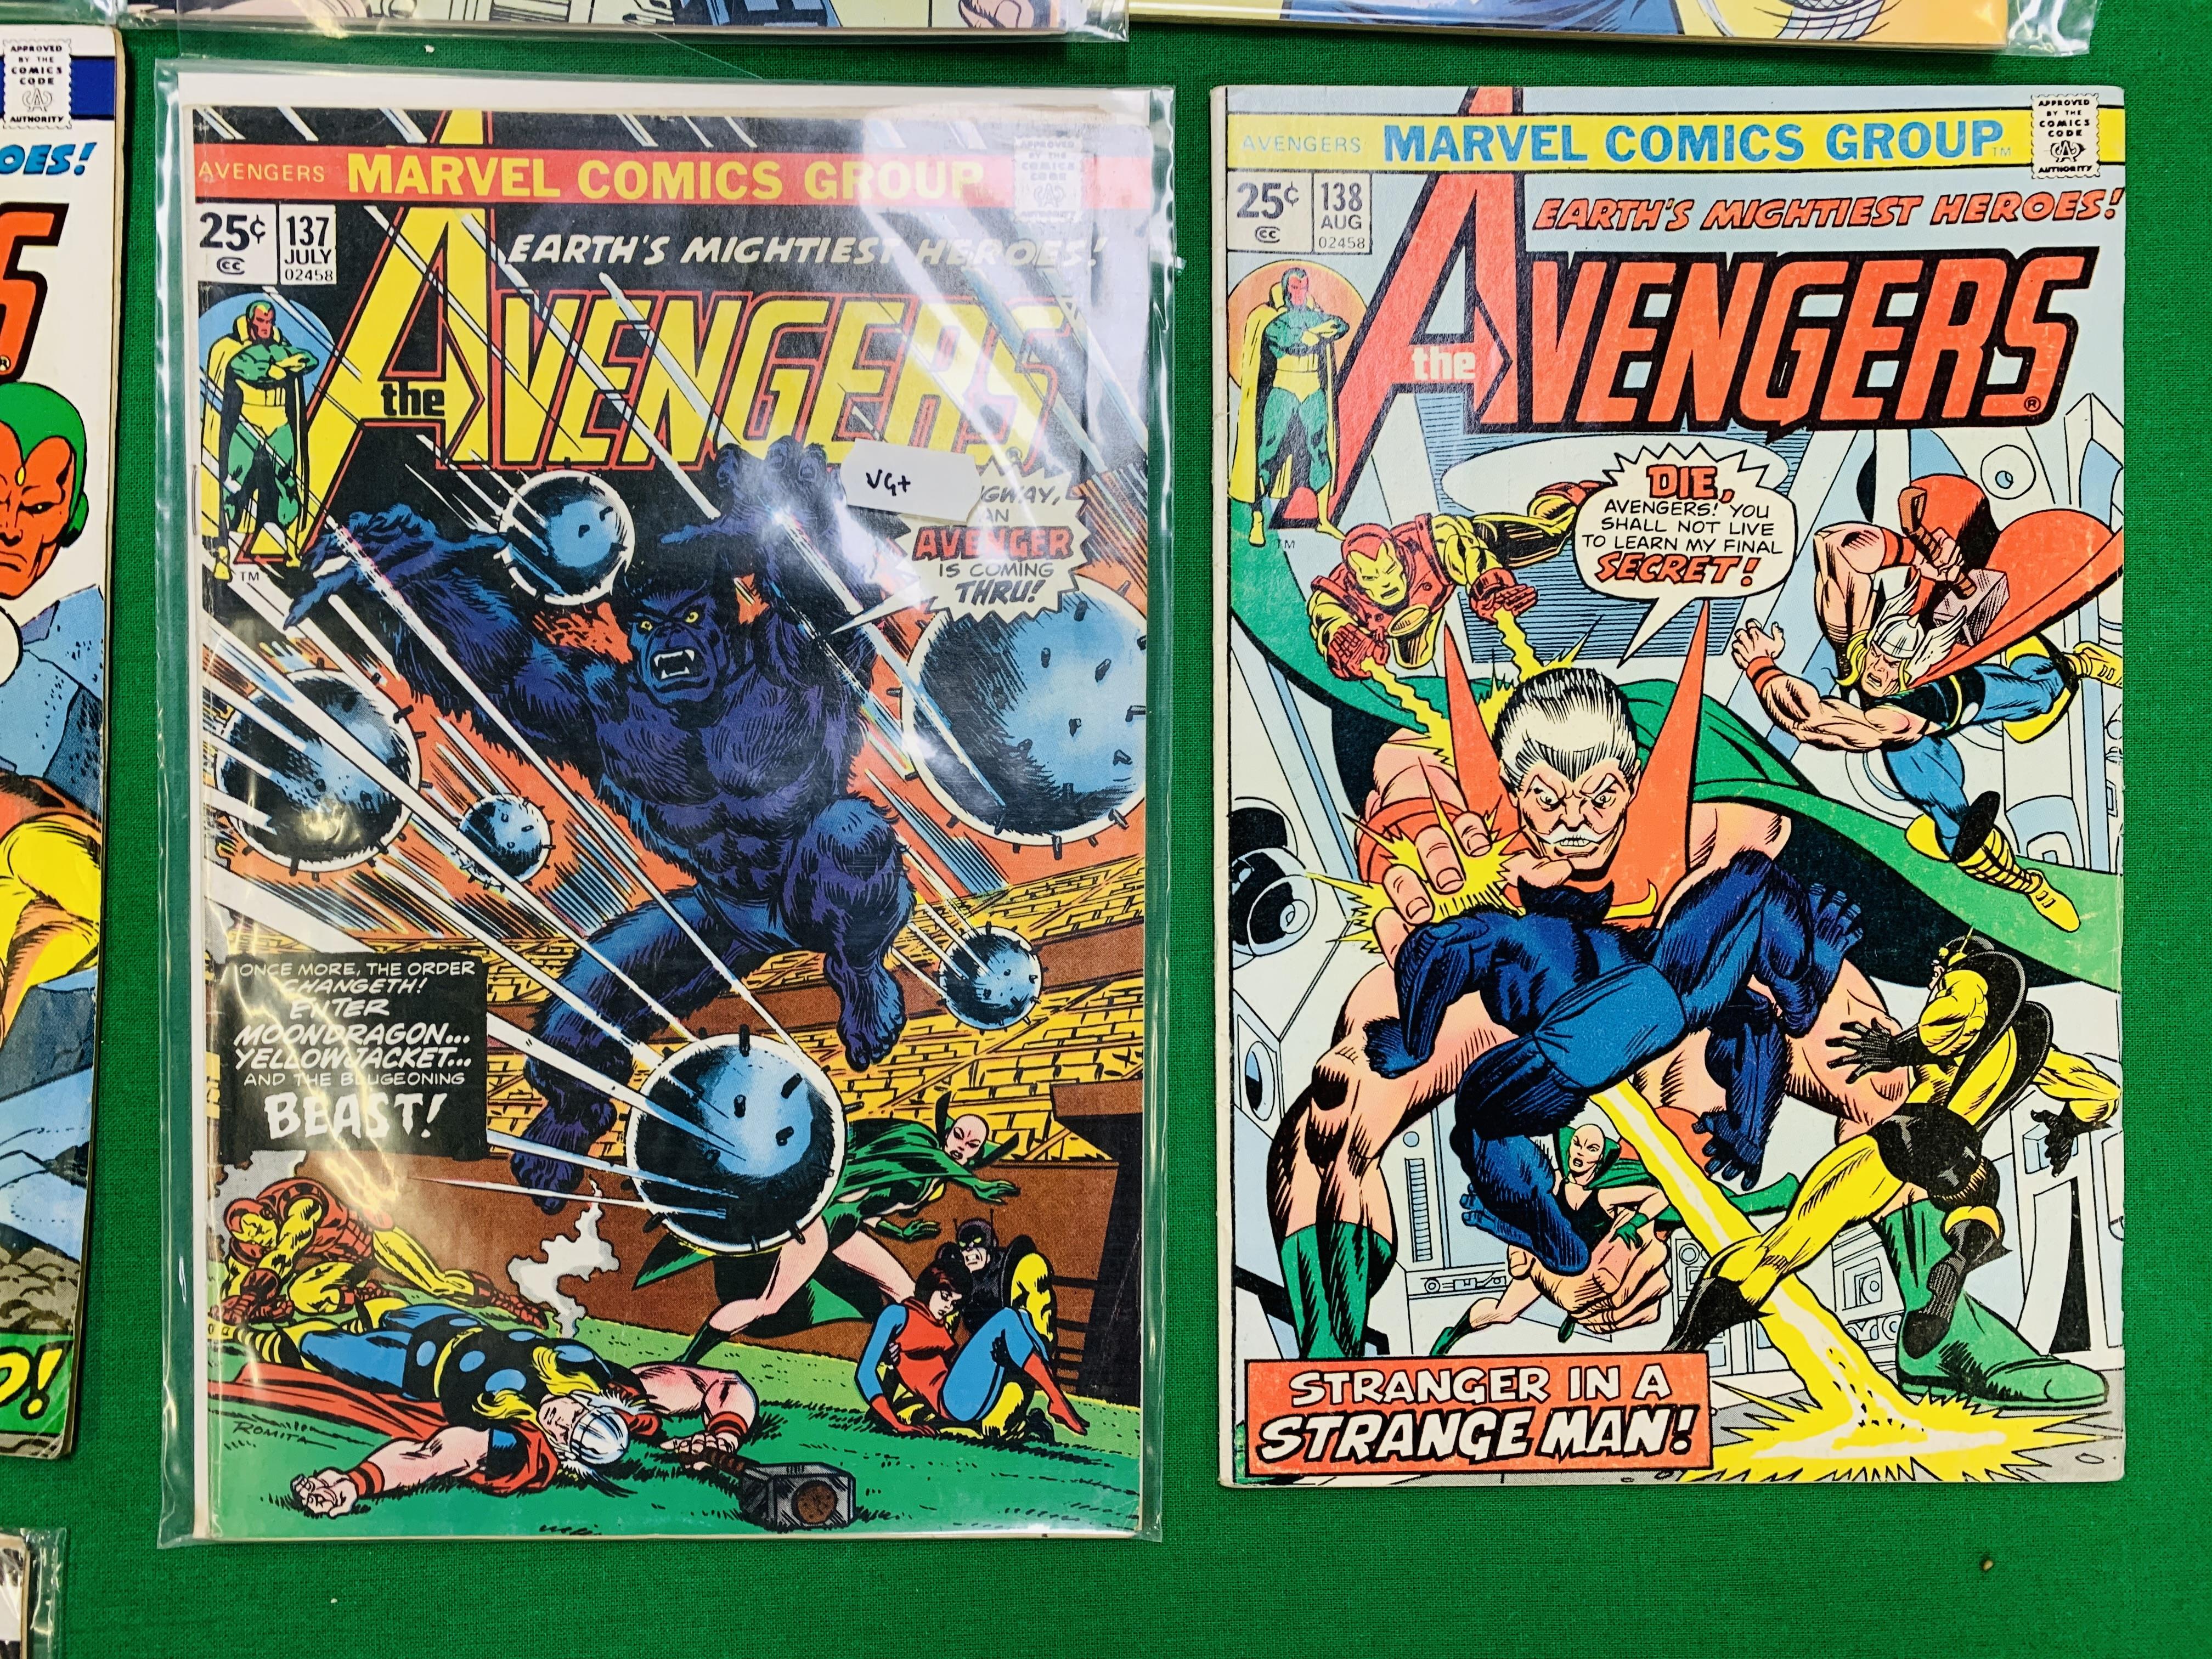 MARVEL COMICS THE AVENGERS NO. 101 - 299, MISSING ISSUES 103 AND 110. - Image 21 of 130